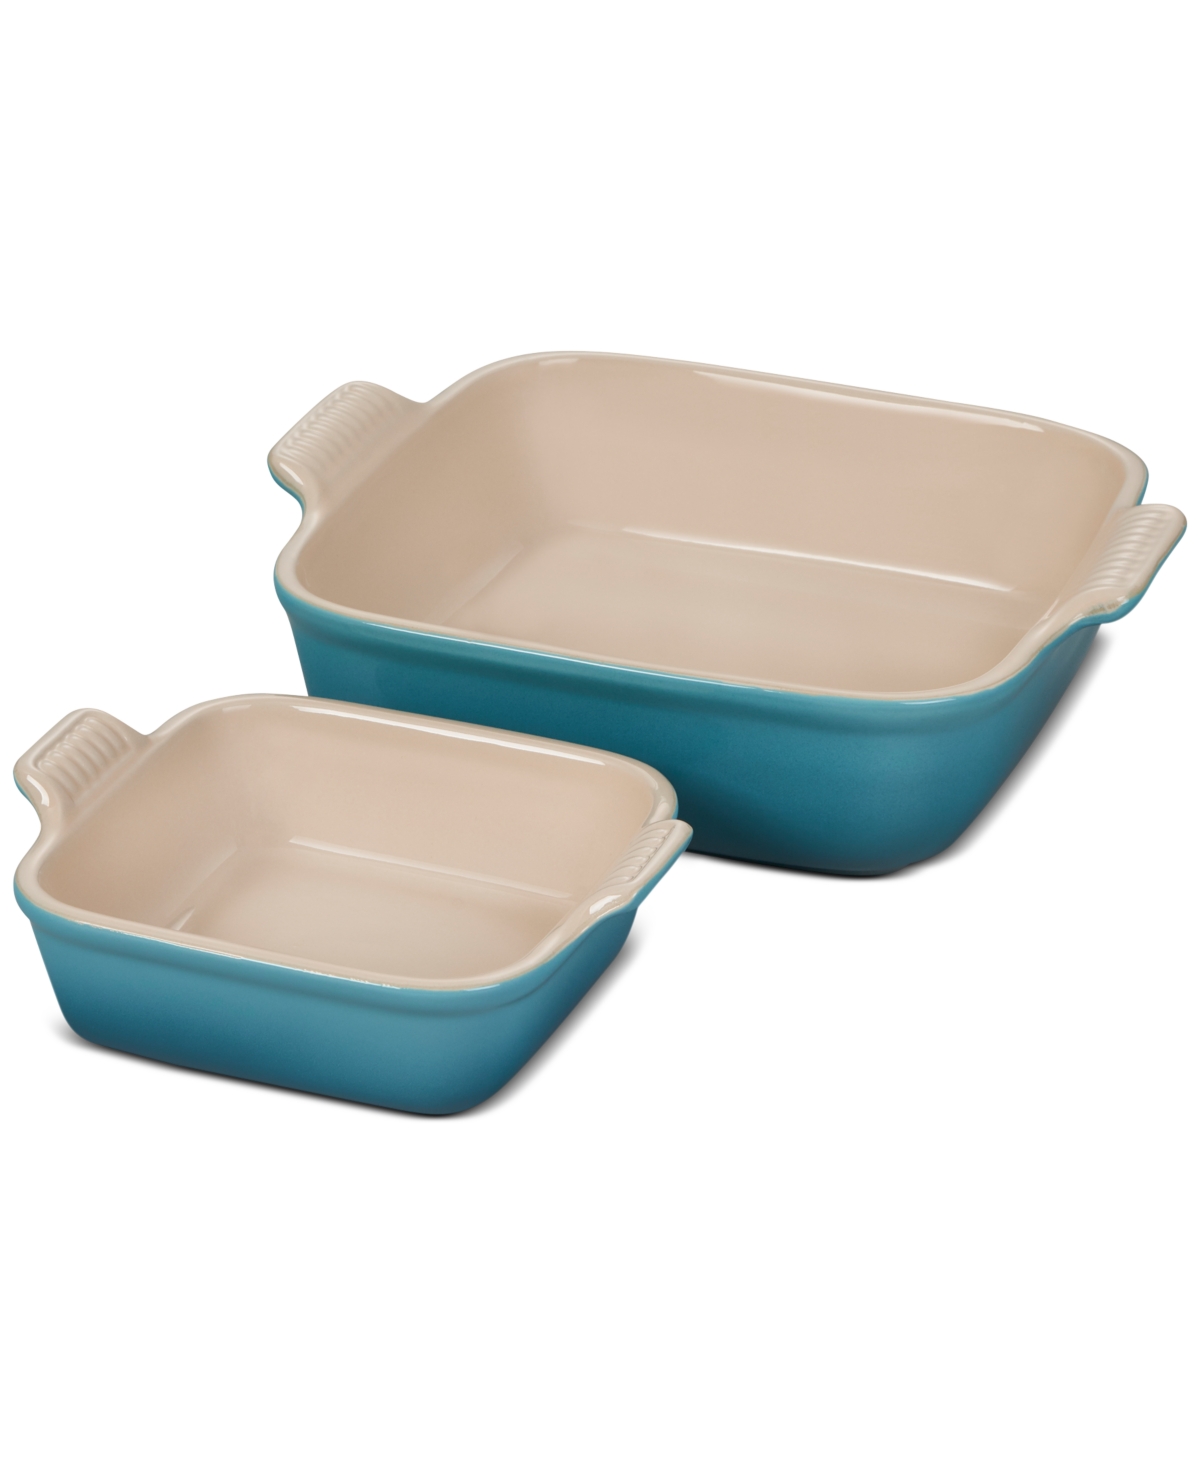 Le Creuset Heritage Square Baking Dishes, Set Of 2 In Caribbean